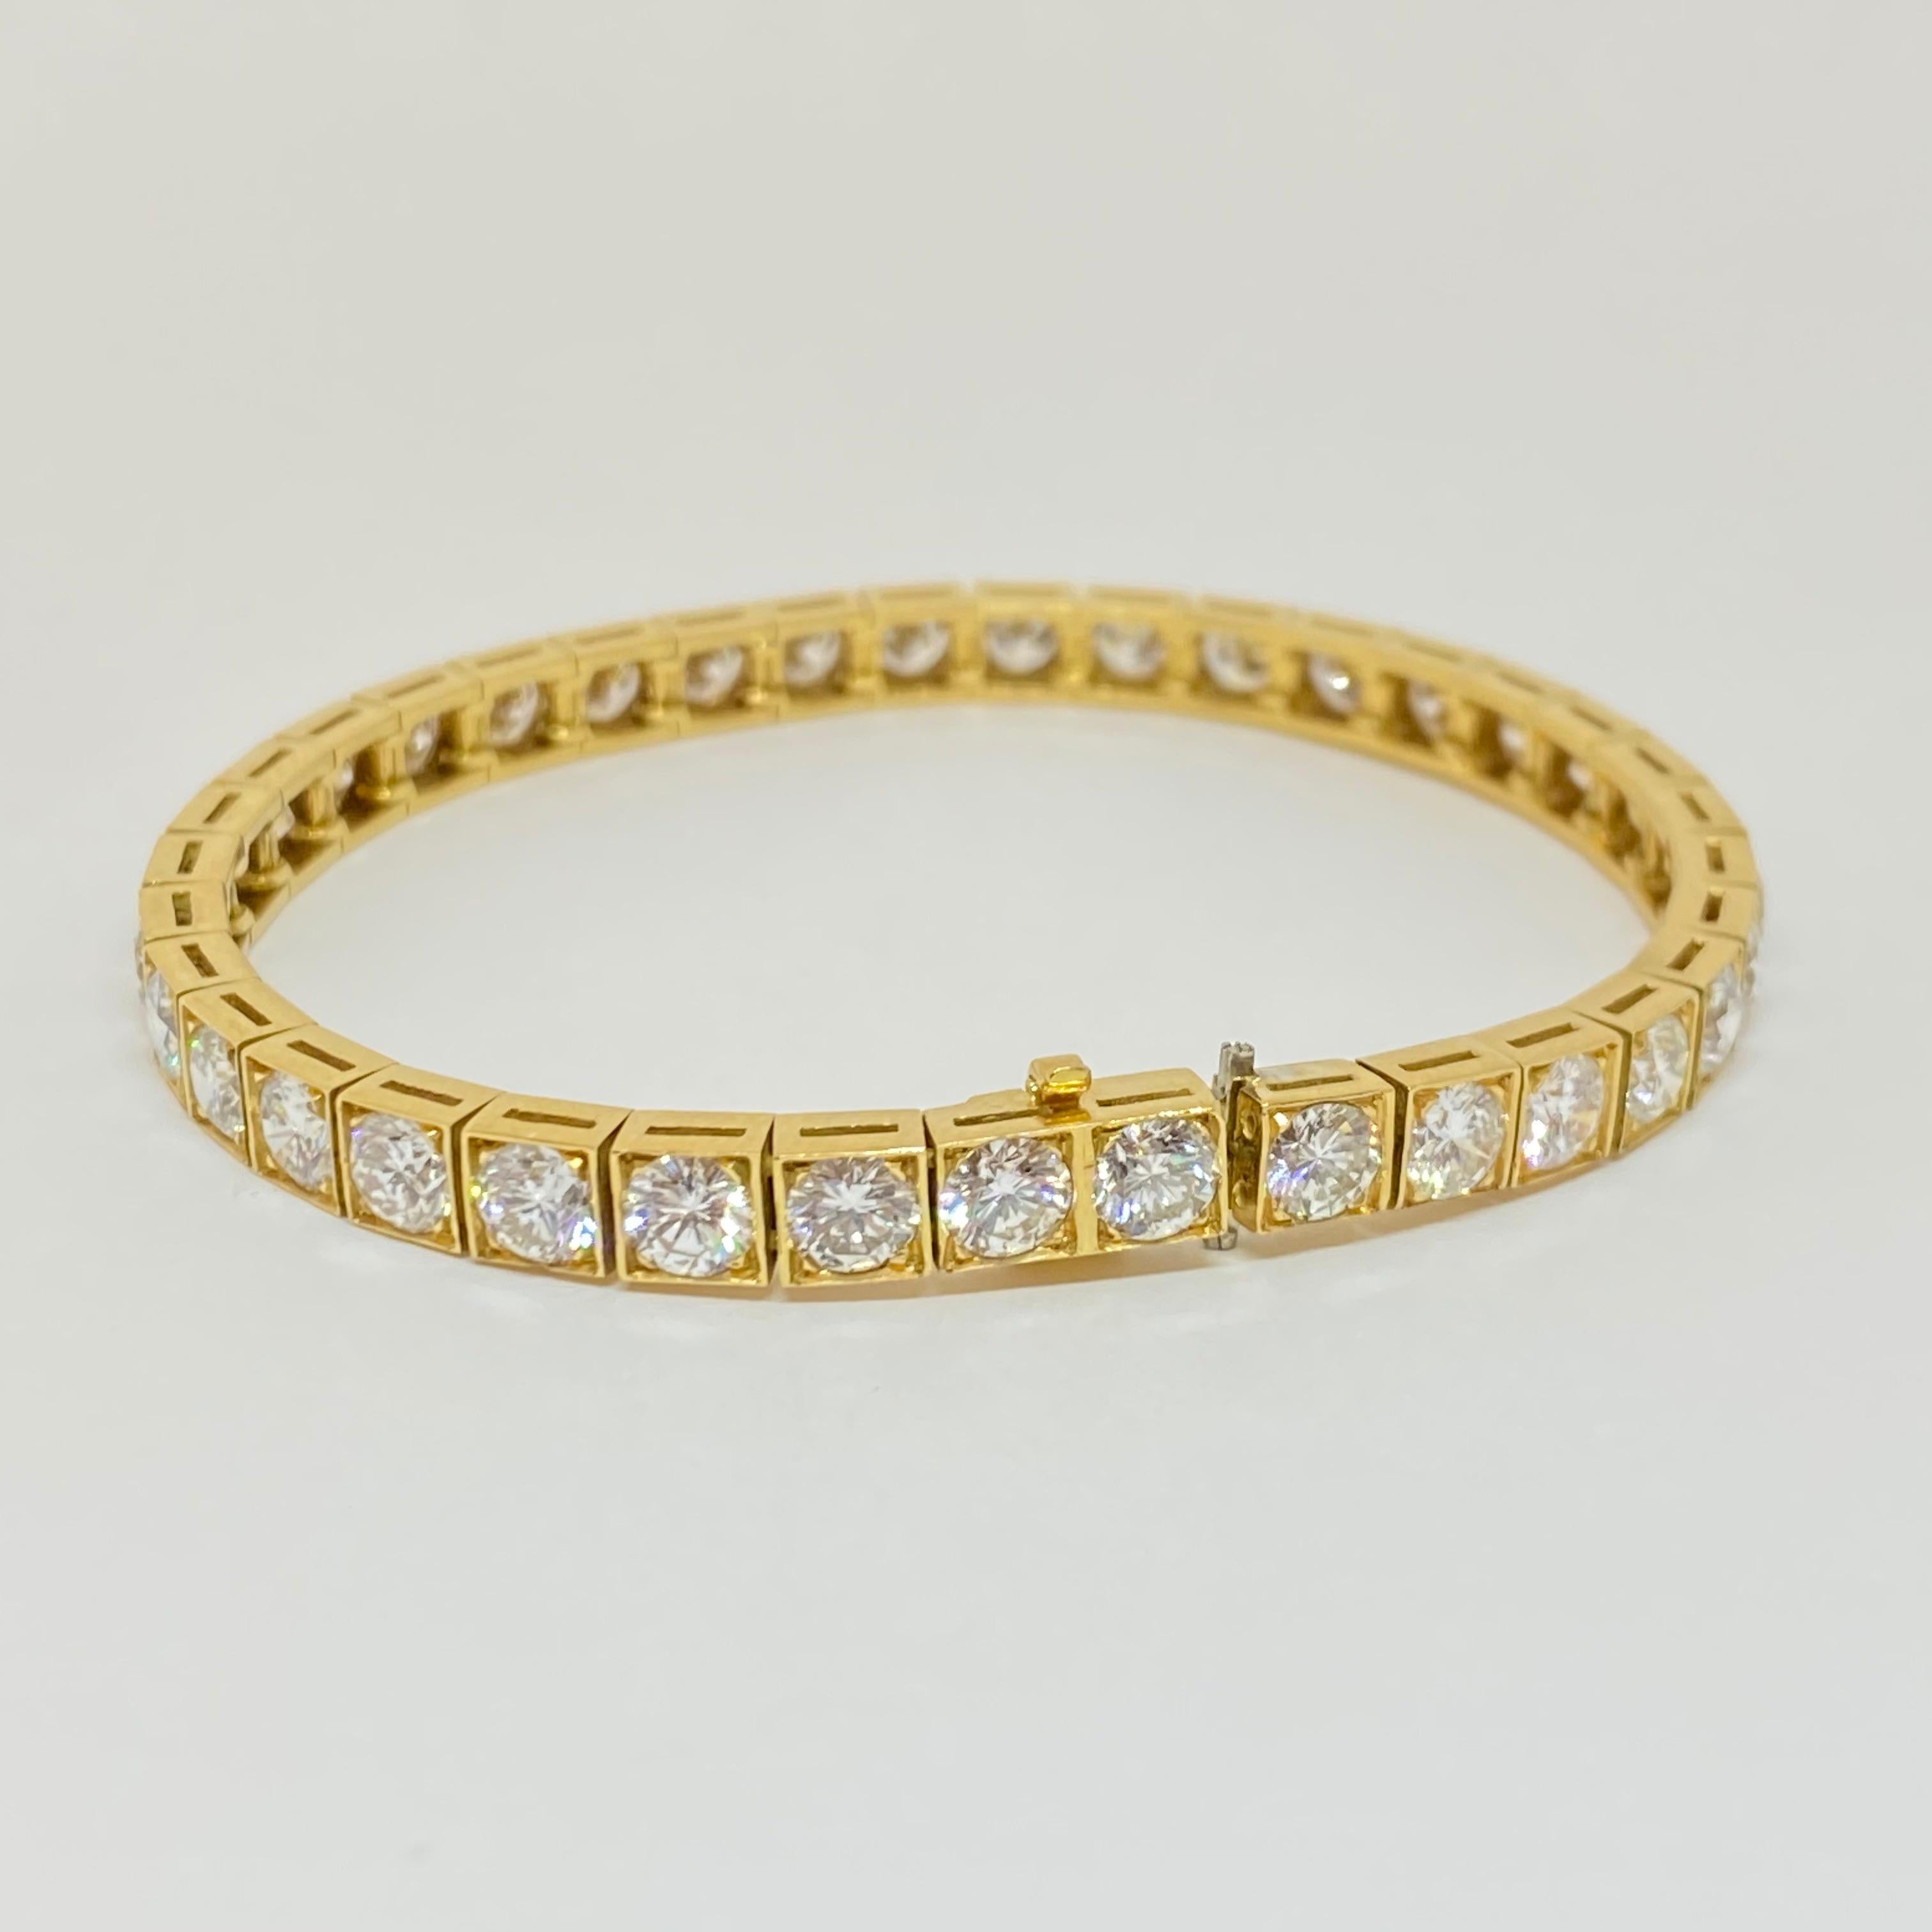 Elegant classic tennis bracelet in new condition designed in premium 18 karat yellow gold. Set with thirty-six round brilliant cut diamonds in square links, attached to a secure box and tongue clasp and safety.  The bracelet measures 5mm wide.